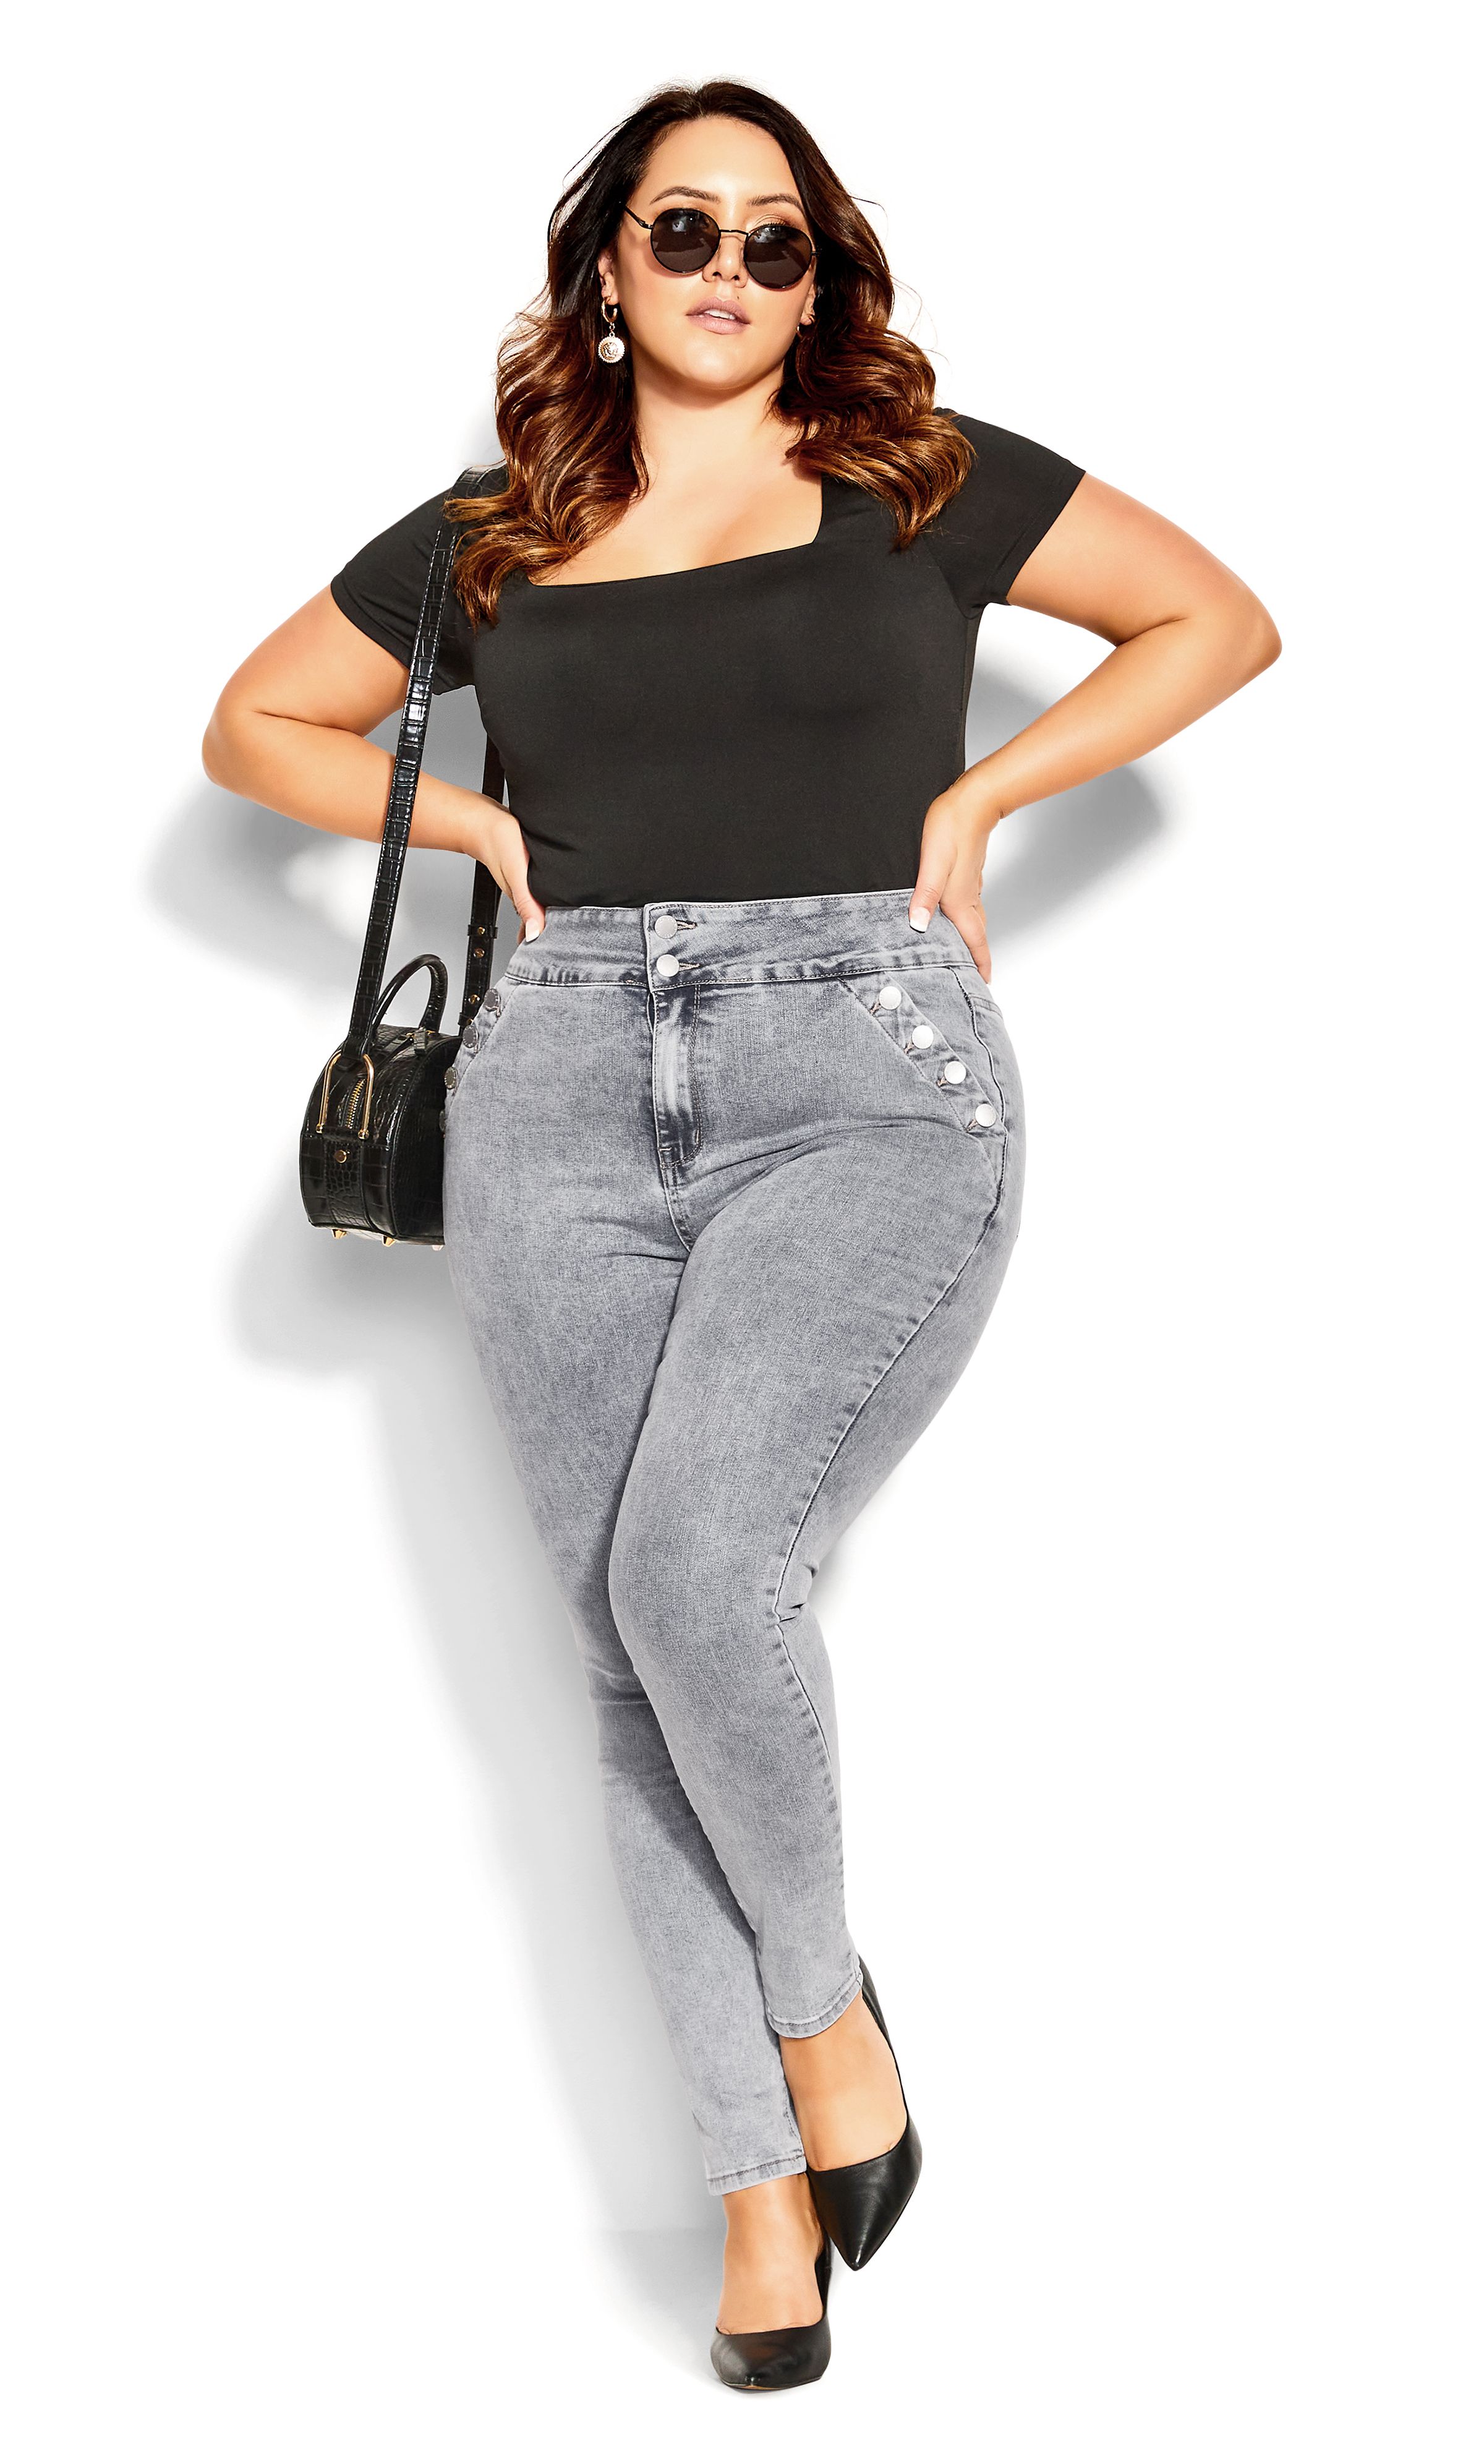 Look like a total dream in the curve-flaunting stylings of our Harley Buttoned Up Jean. Flaunting a stretch denim construction and high rise fit, these skinny jeans are made to endlessly flatter! Key Features Include: - Harley: the perfect fit for an hourglass body shape - High rise - Double button & zip fly closure - Button detail - 4-pocket denim styling - Stretch cotton blend fabrication - Skinny leg - High denim fibre retention to maintain shape - Signature Chic Denim hardware throughout zips, buttons and rivets - Full length Keep utterly stylish in an off-shoulder top and lace up block heels. Smart-casual perfection!